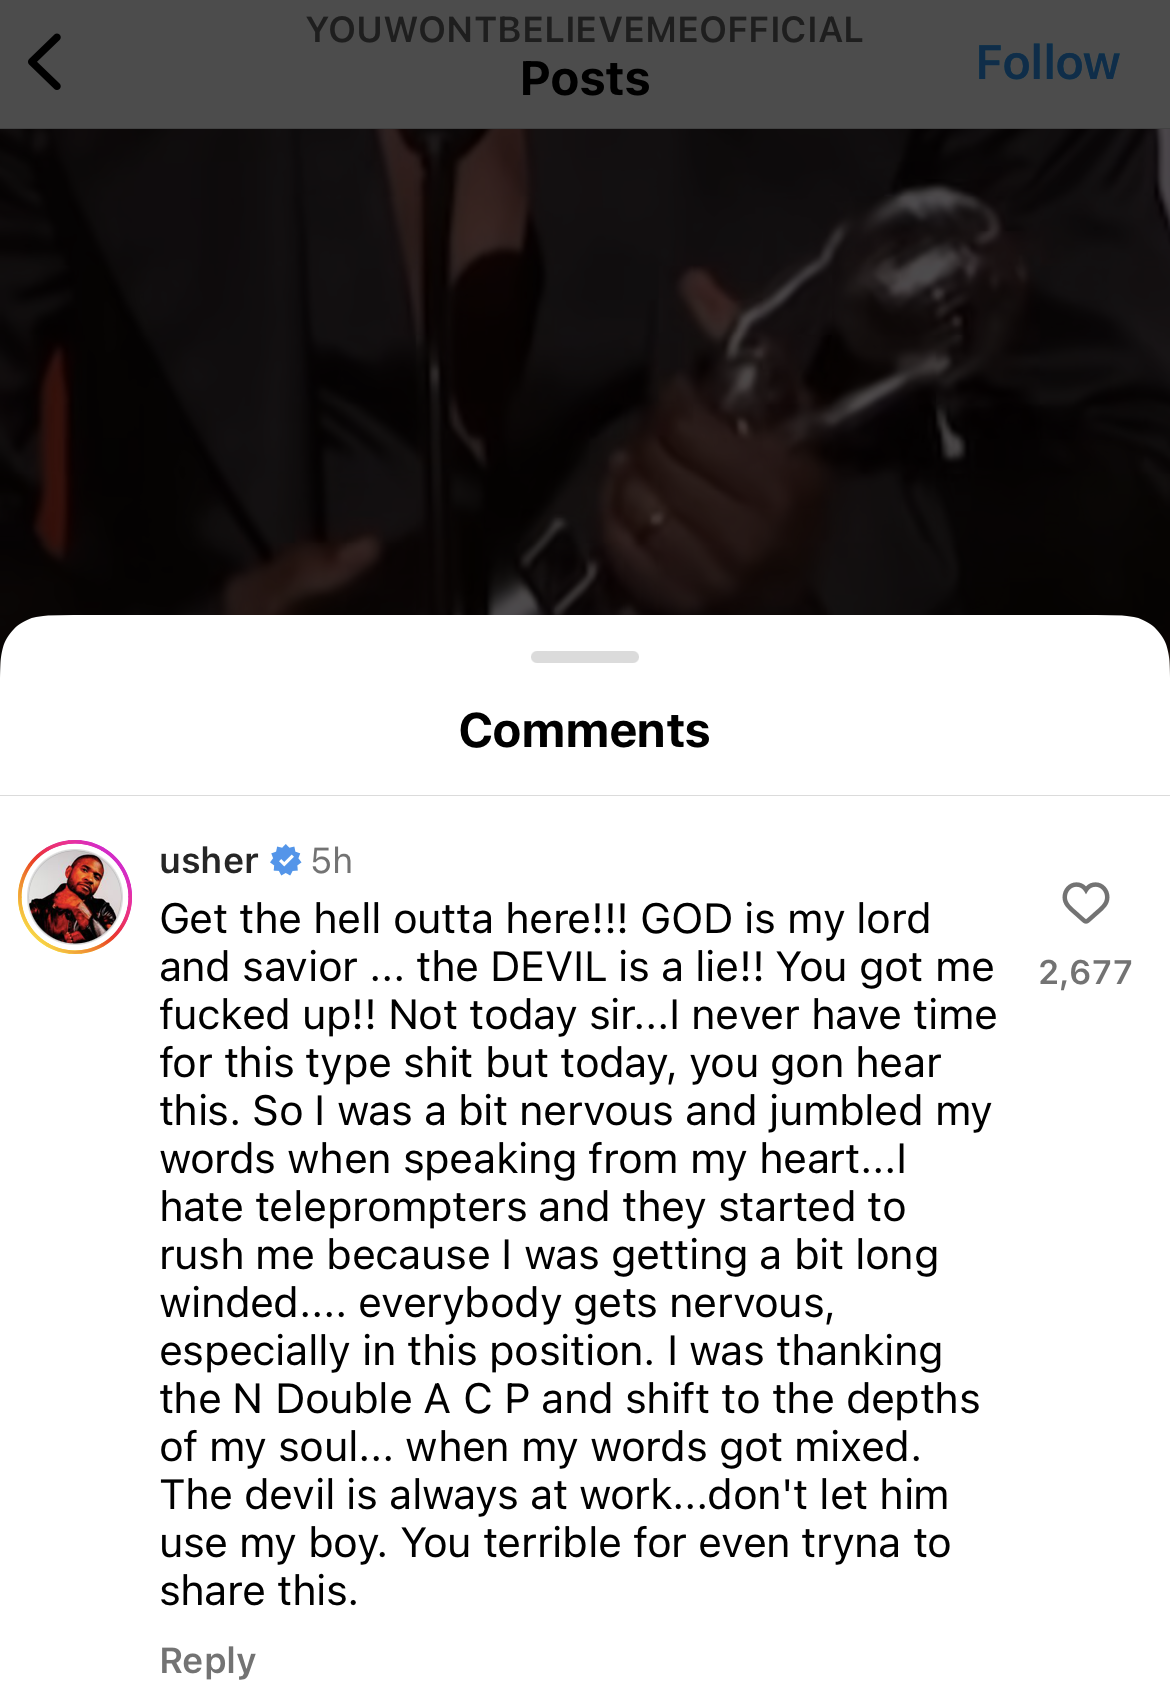 Usher comments on an Instagram post, passionately sharing religious sentiment, with followers responding and many likes